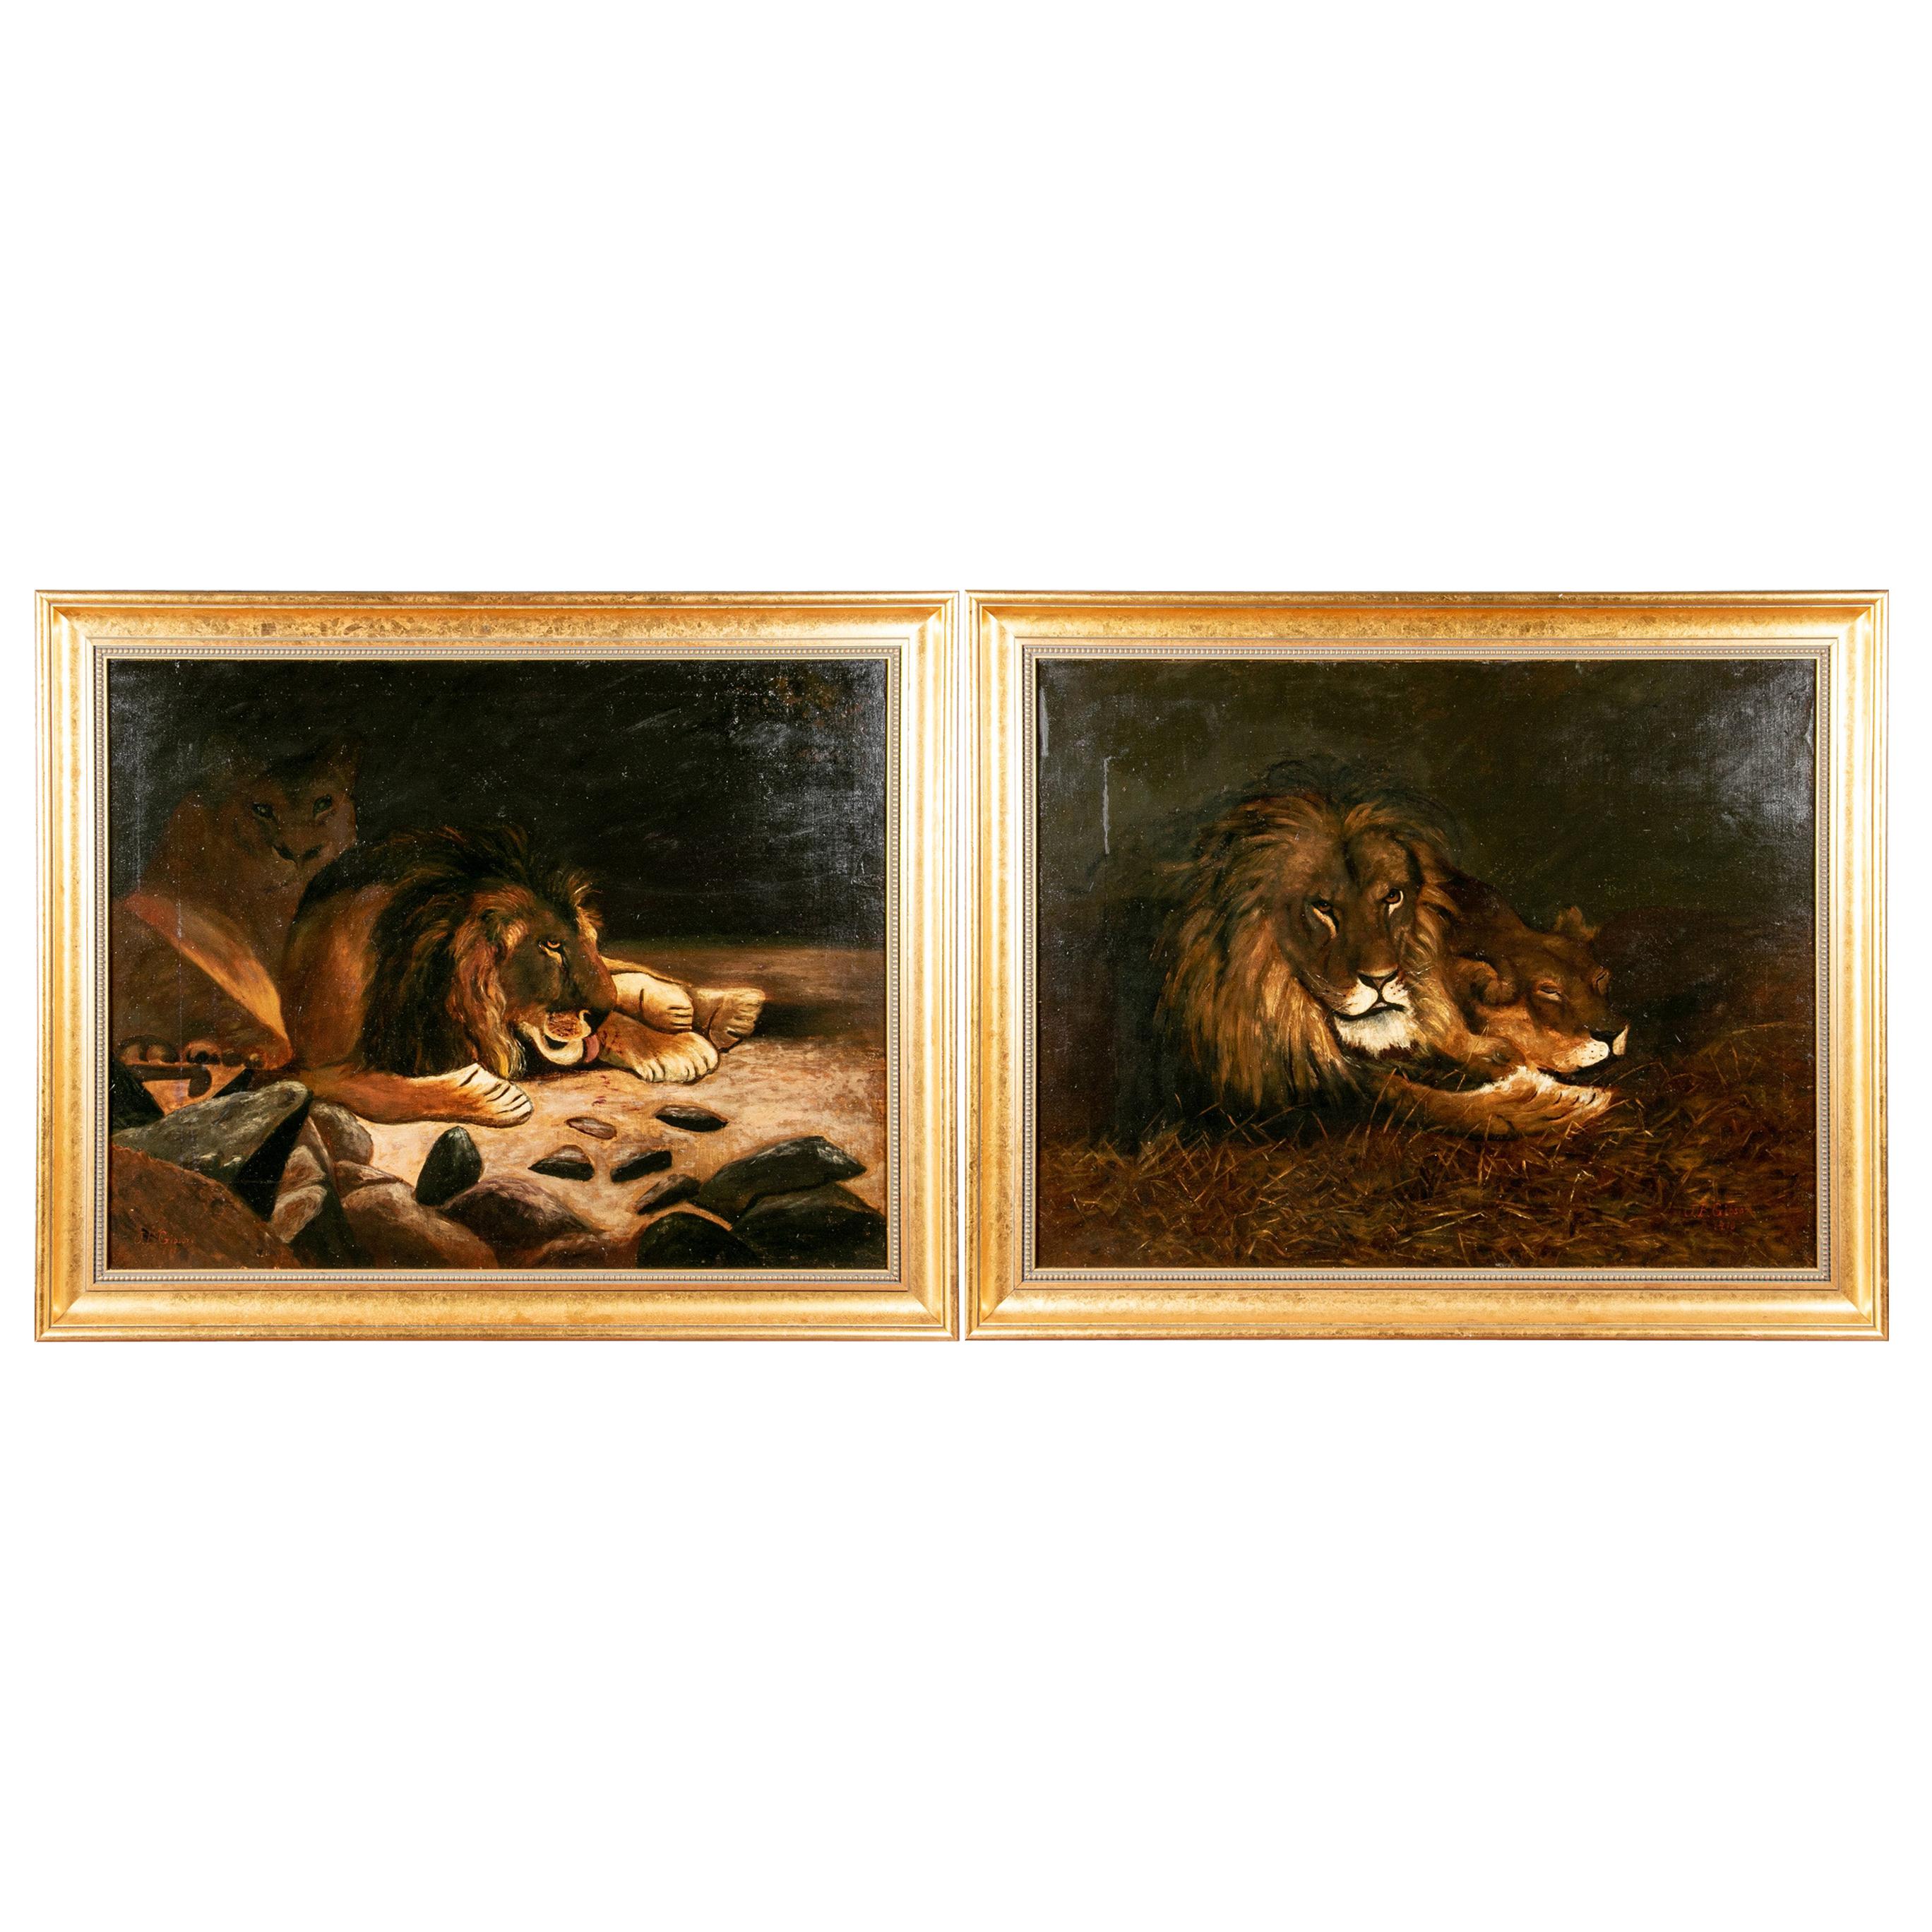 Pair of J.B. Gibson 'American, Early 20th Century Oil on Canvas' Depicting Lions